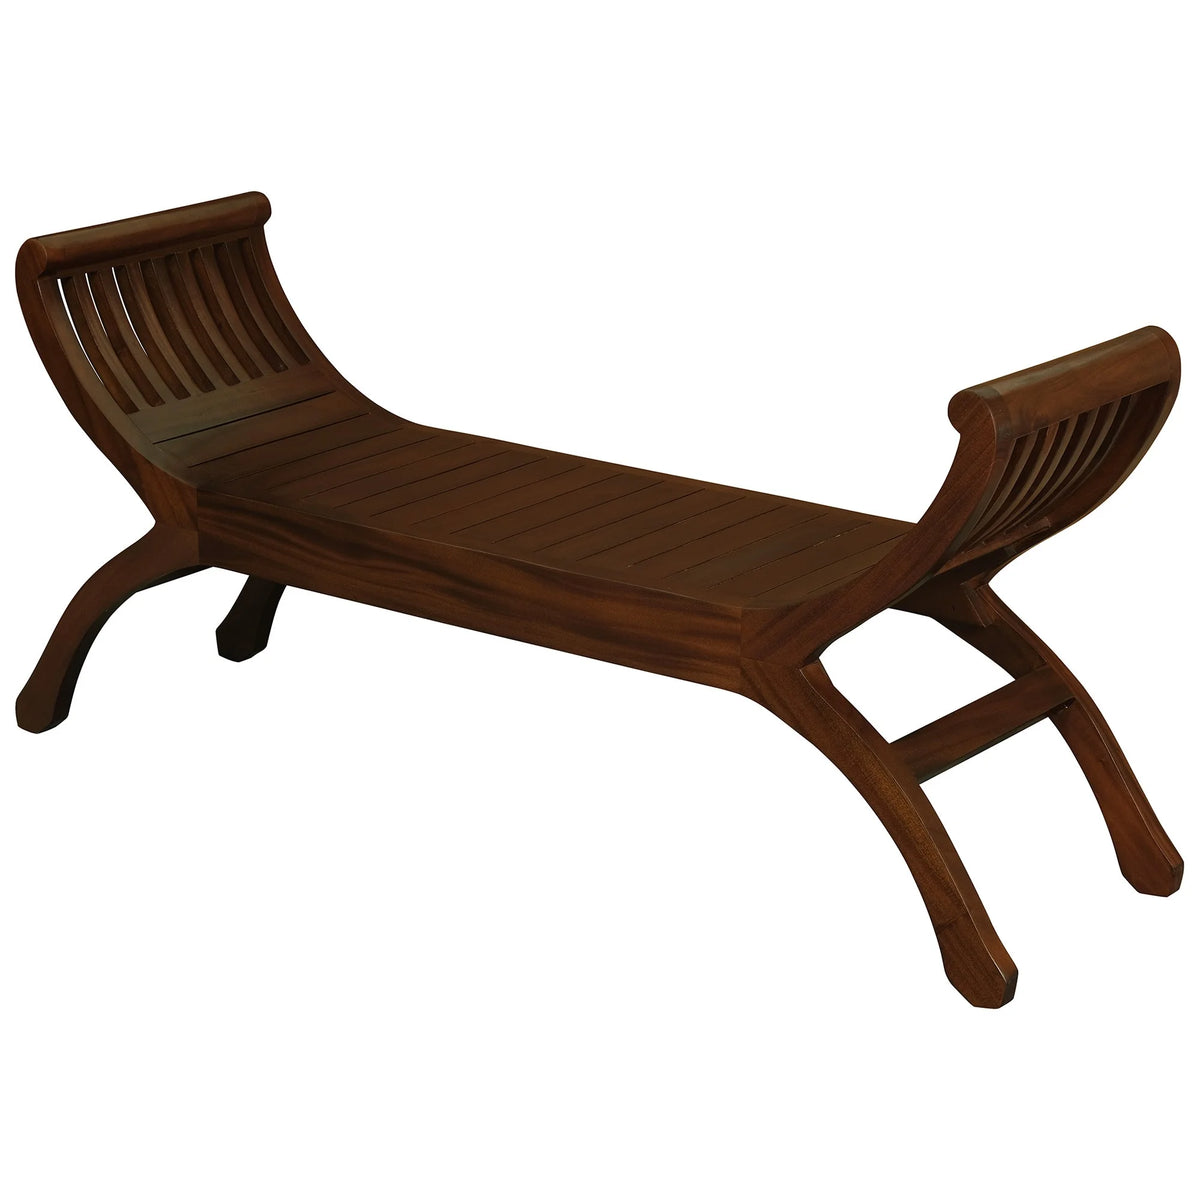 Maeve Solid Mahogany Timber Curved Bench in Mahogany - 130cm - Notbrand